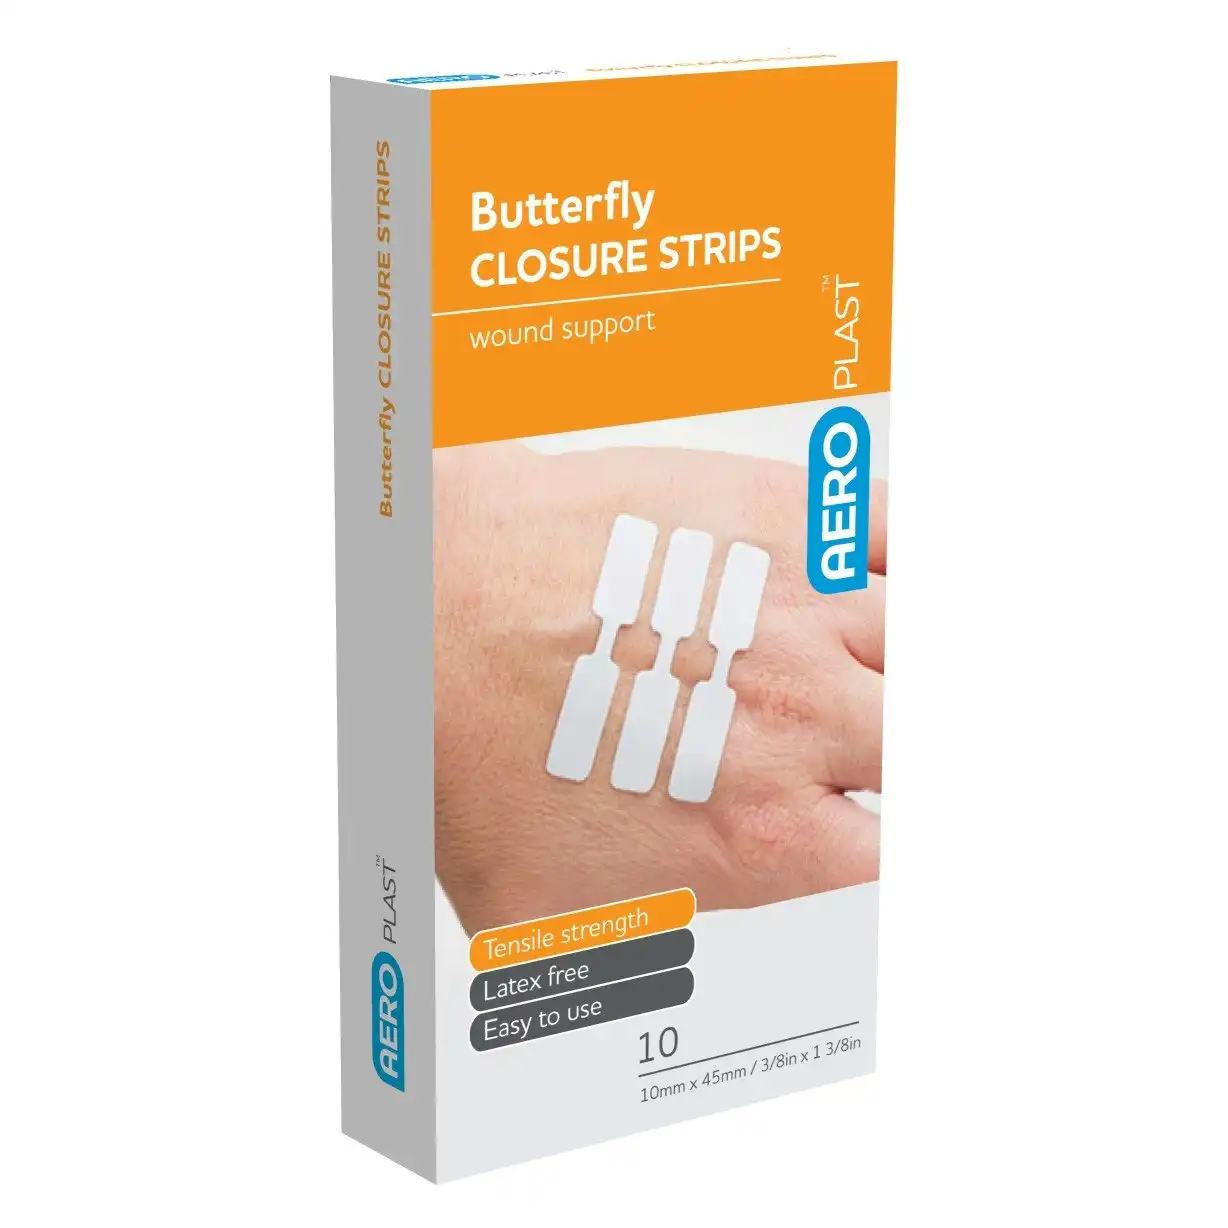 Aeroplast Butterfly Closure Strips Wound Protection 10 Adhesive Strips